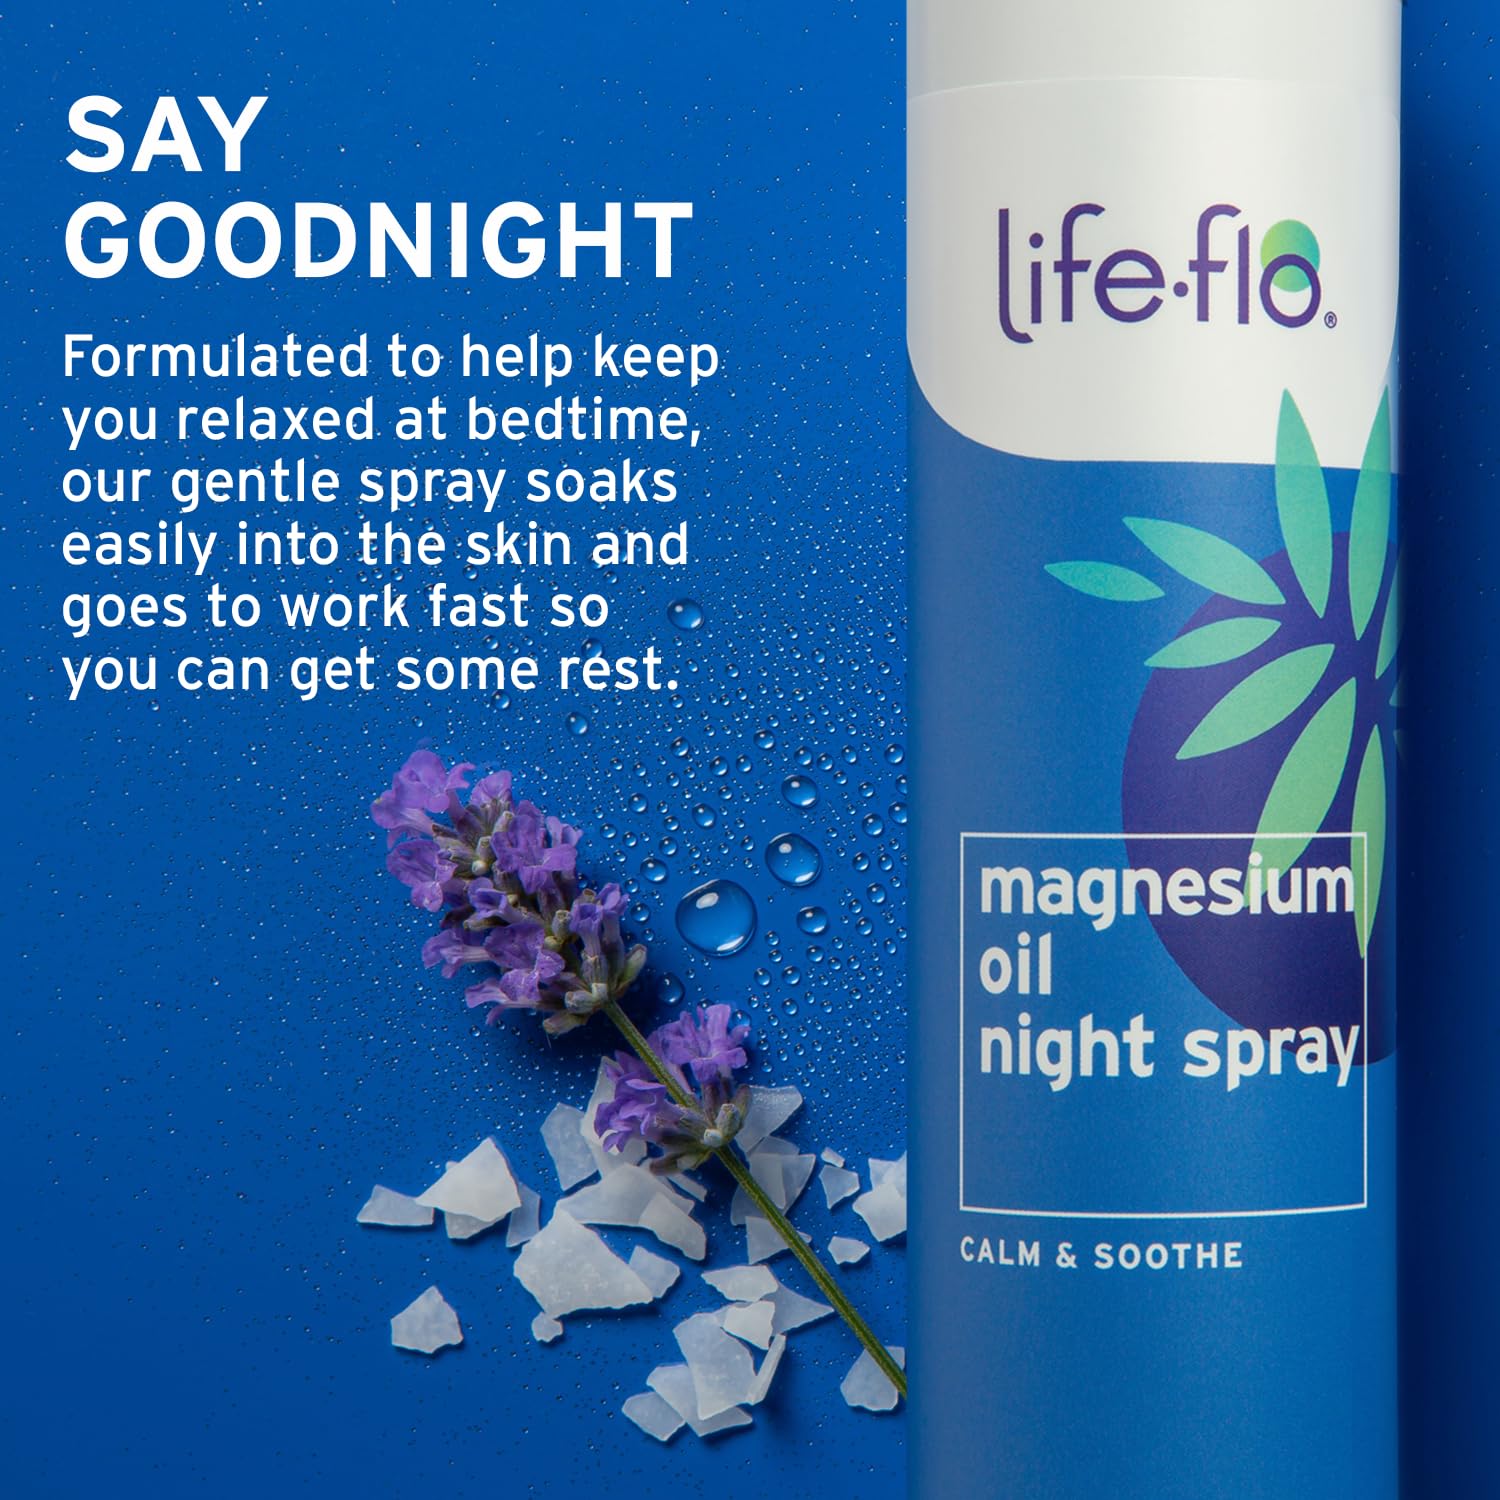 Life-flo Magnesium Oil Night Spray, Soothing Magnesium Spray w/Magnesium Chloride from Zechstein Seabed and Lavender Oil, Calms and Relaxes Body and Mind, 60-Day Guarantee, Not Tested on Animals, 8oz